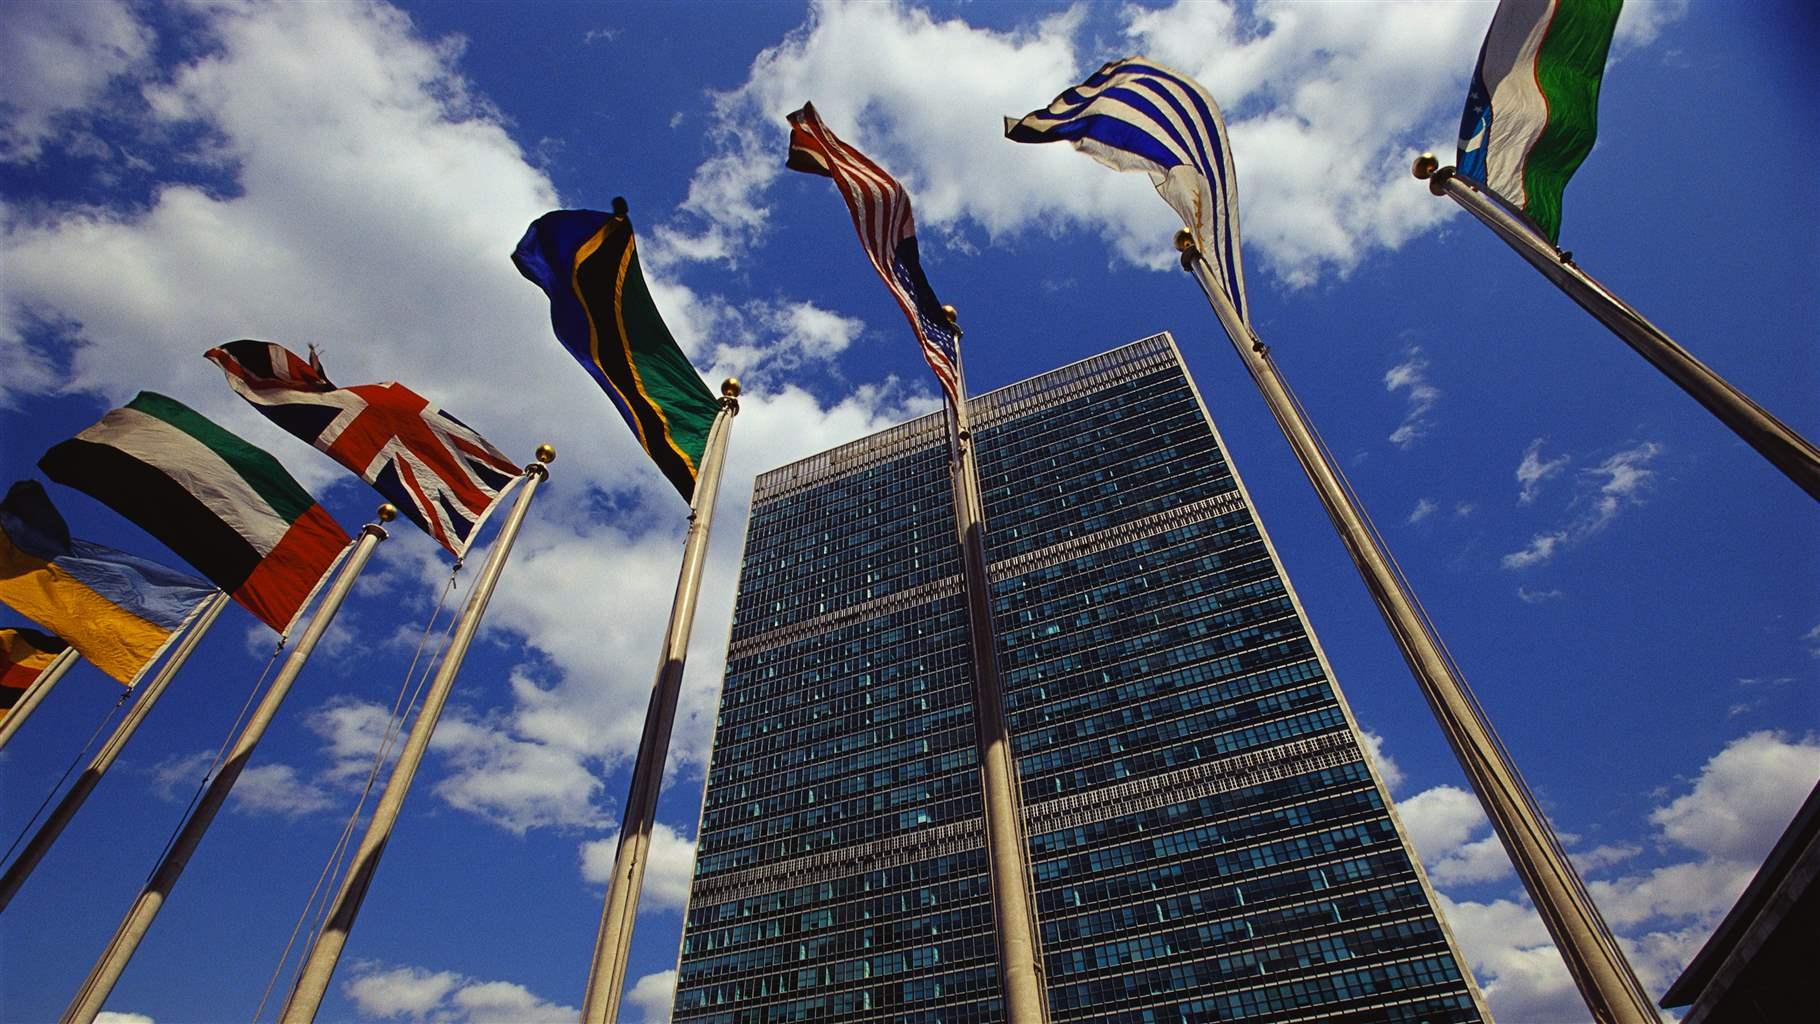 Flags fly outside the General Secretariat Building at the United Nations Headquarters.